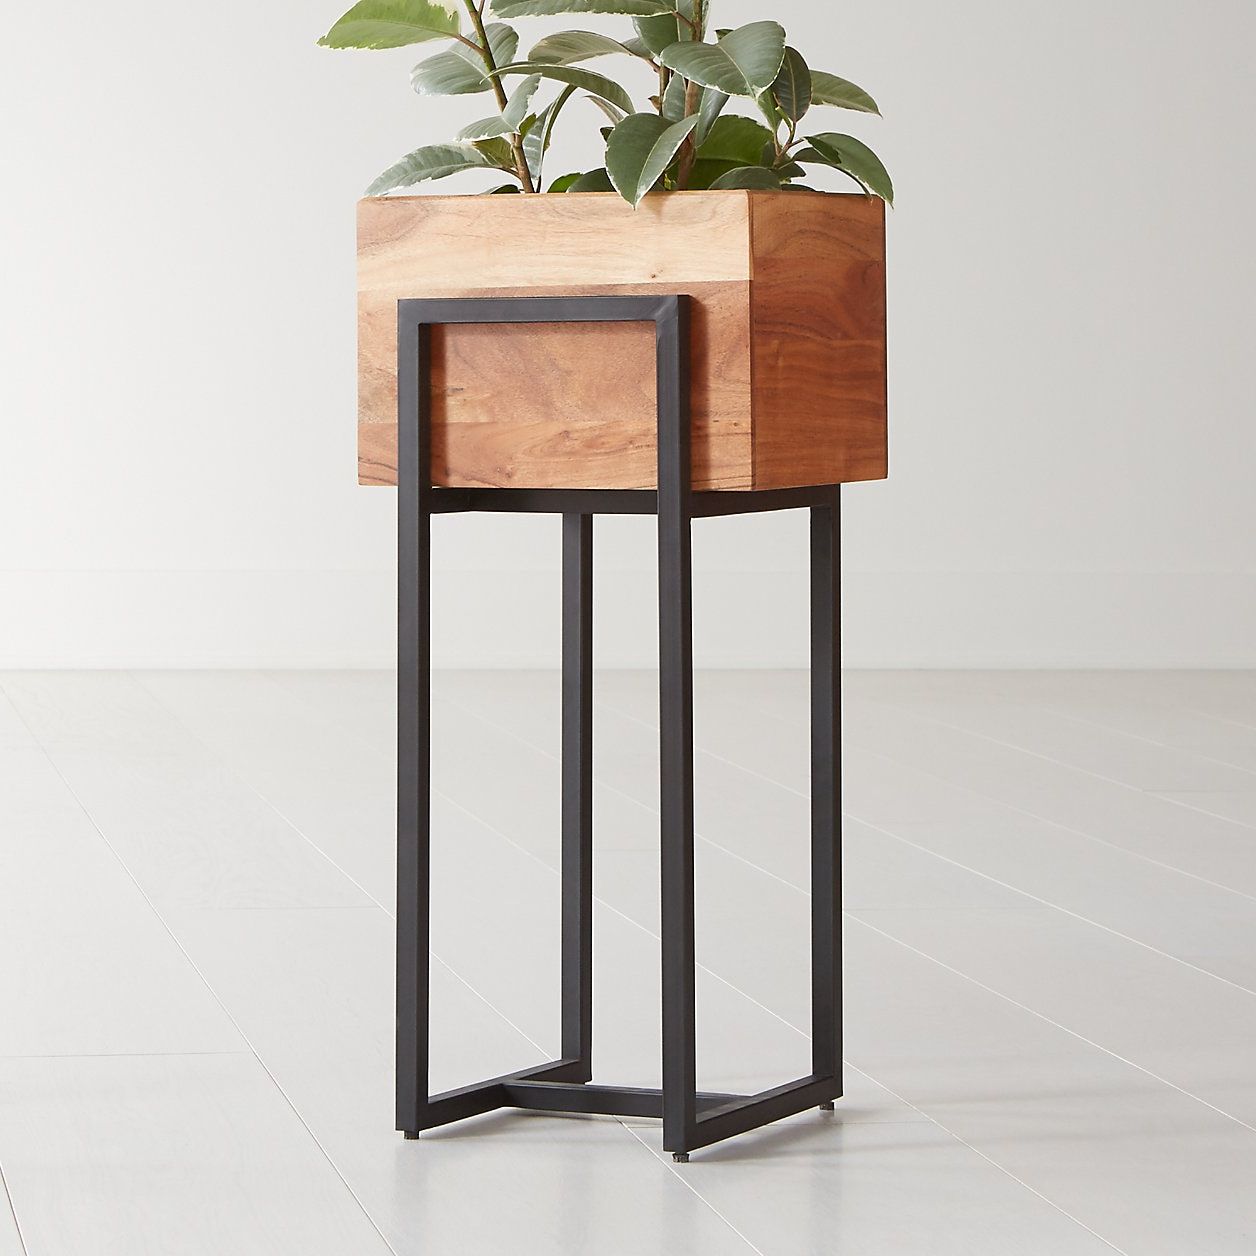 15 Best Indoor Plant Stands That Seriously Stand Out (View 11 of 15)